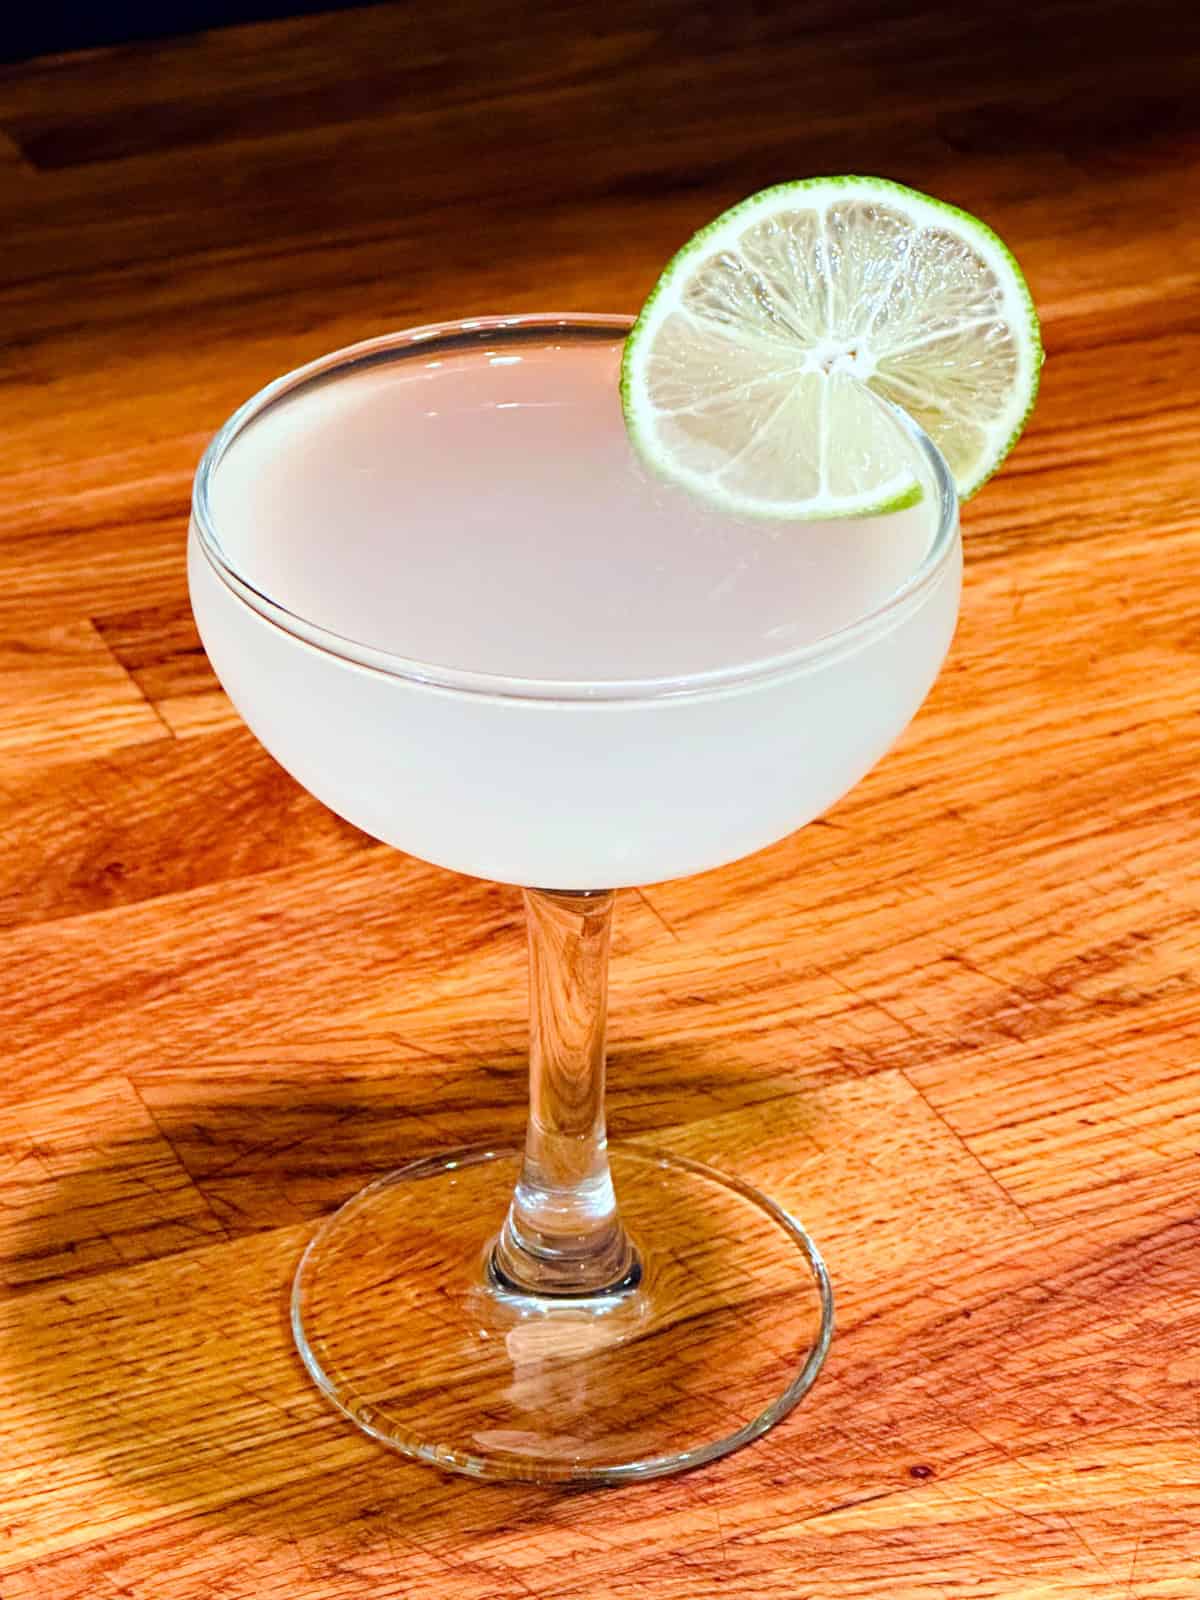 Hemingway daiquiri served in a coupe glass with a lime wheel.